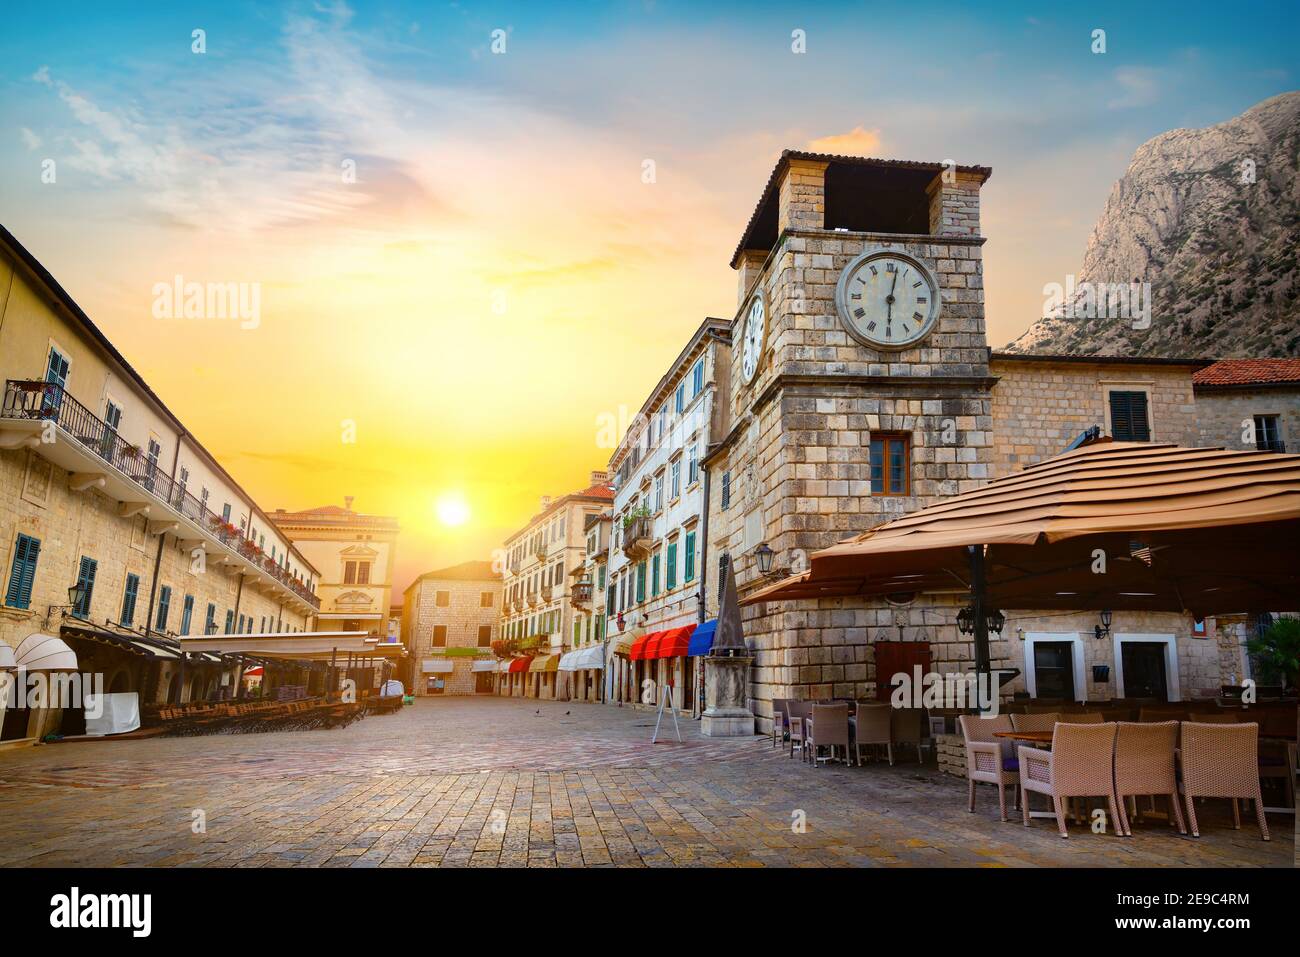 Clock Tower inside the old town of Kotor in Montenegro. Stock Photo